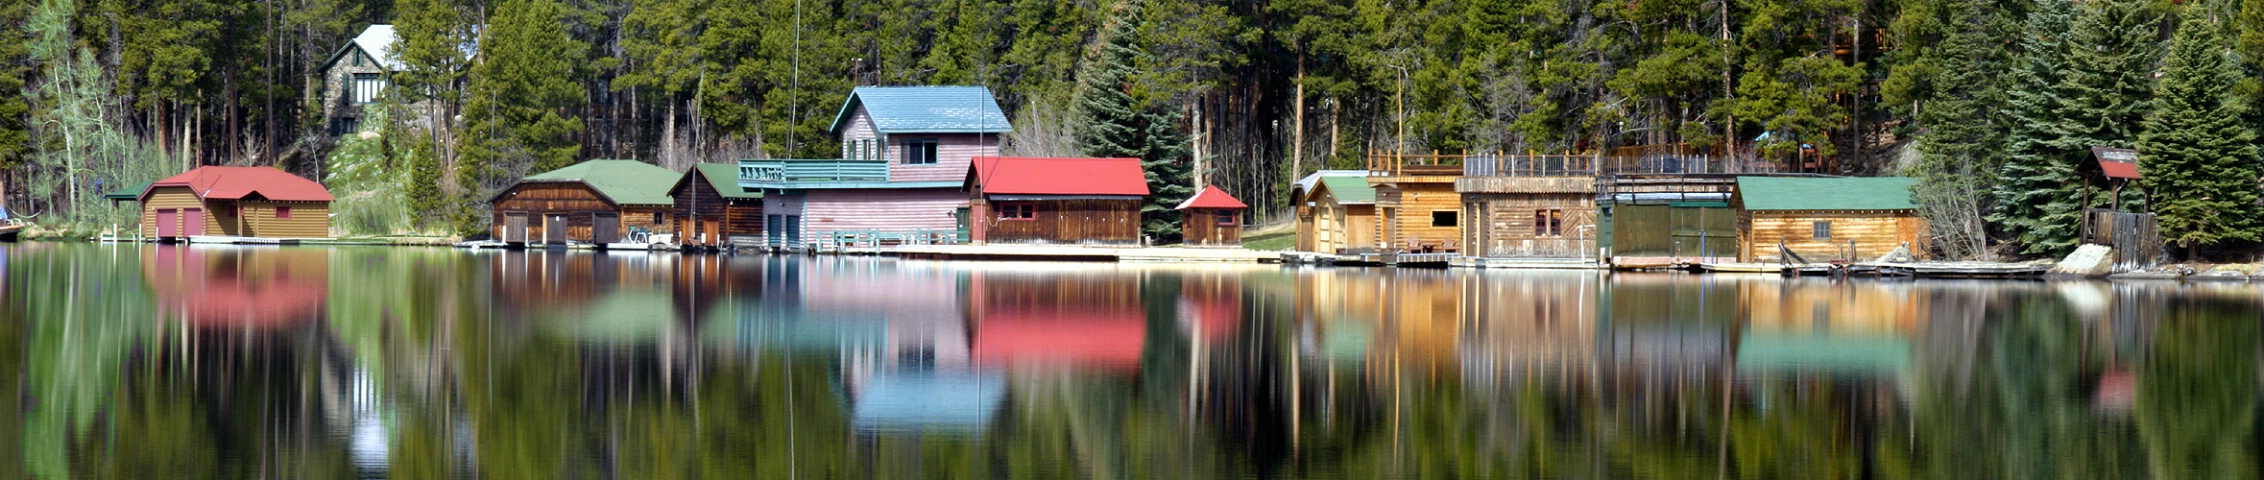 Boathouses on the North Shore